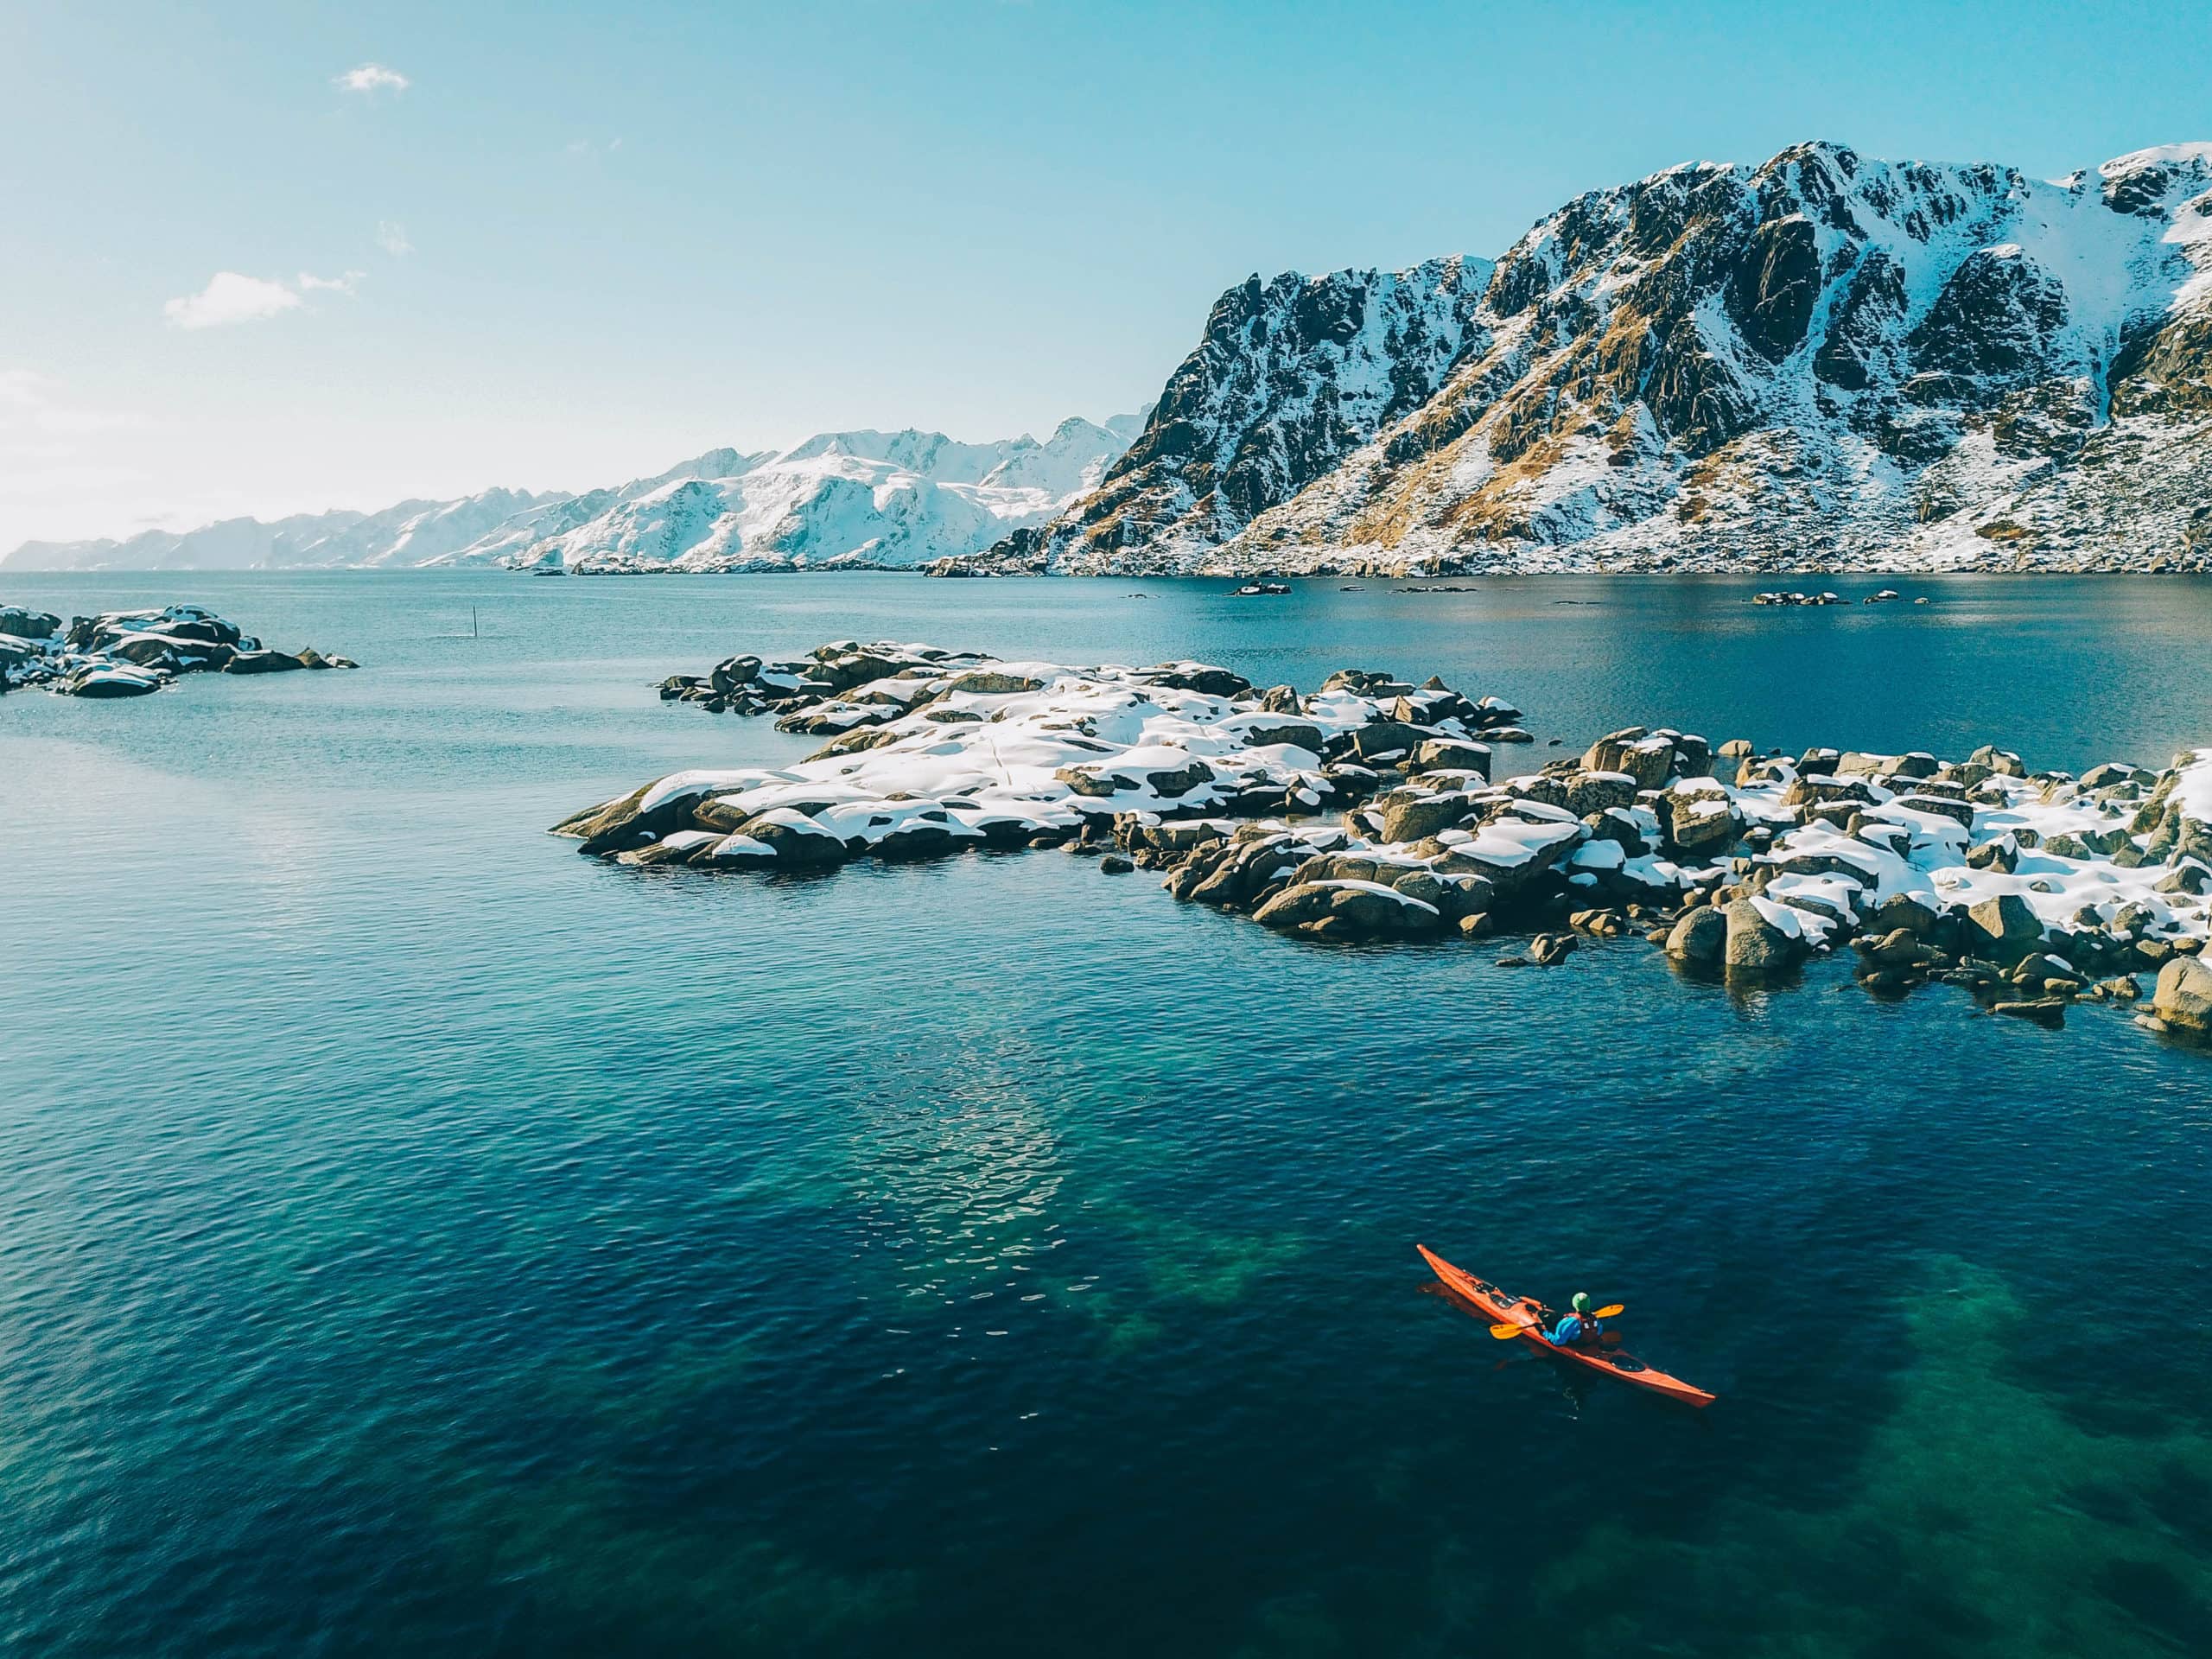 Sea kayak in lofoten with majestic mountains in the background.